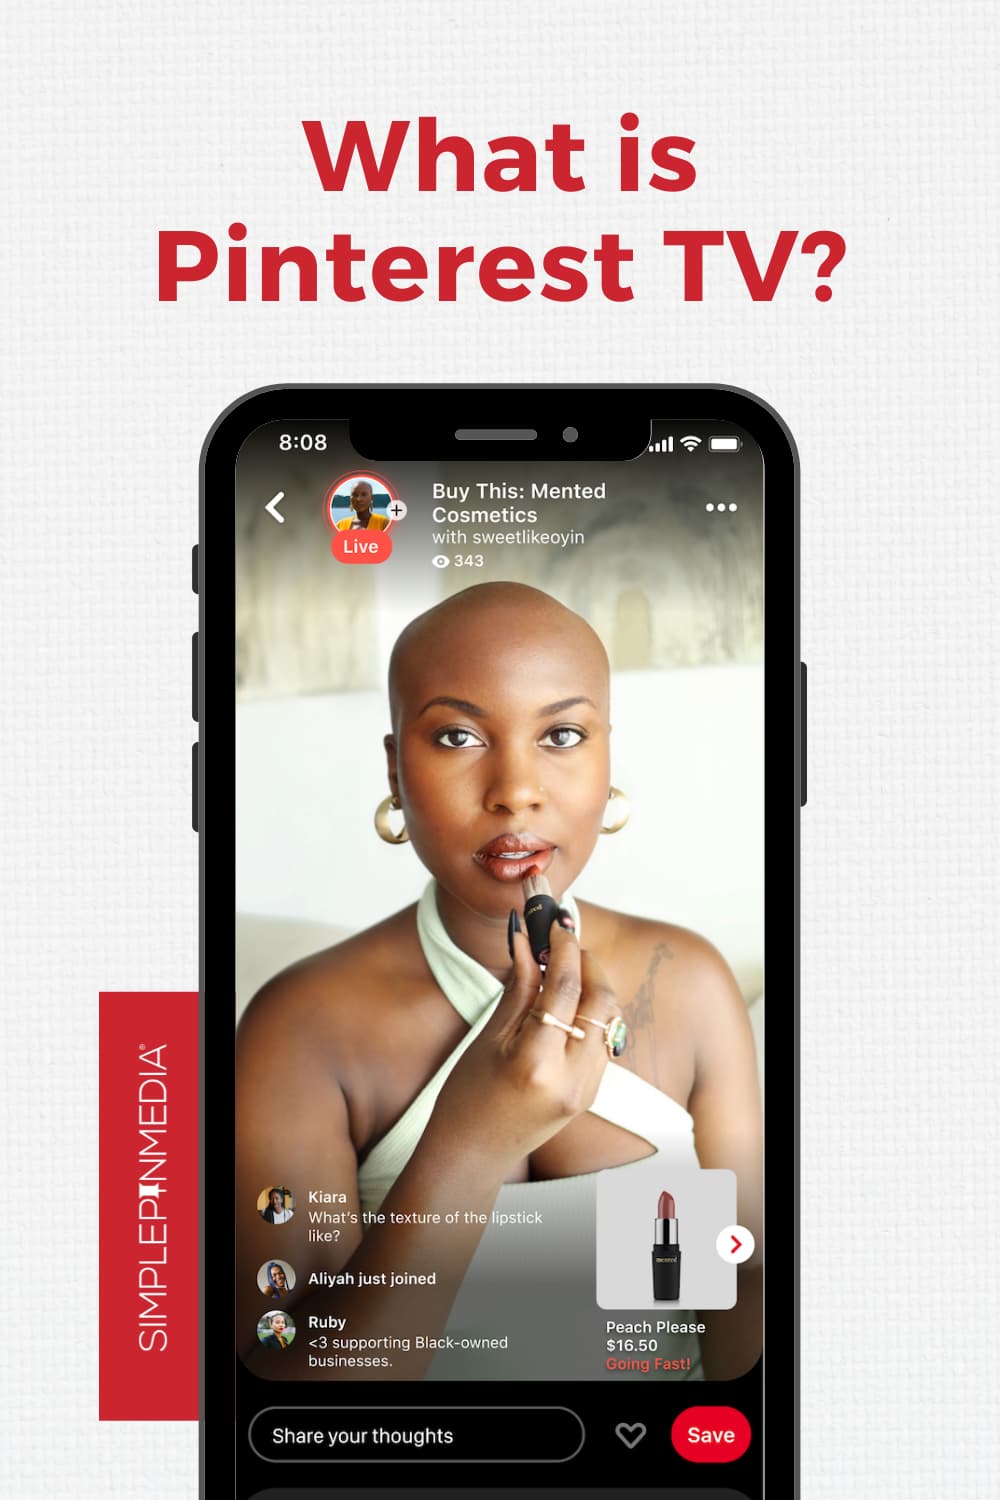 mobile phone displaying a Pinterest TV episode with woman demonstrating lipstick -text "What is Pinterest TV?".